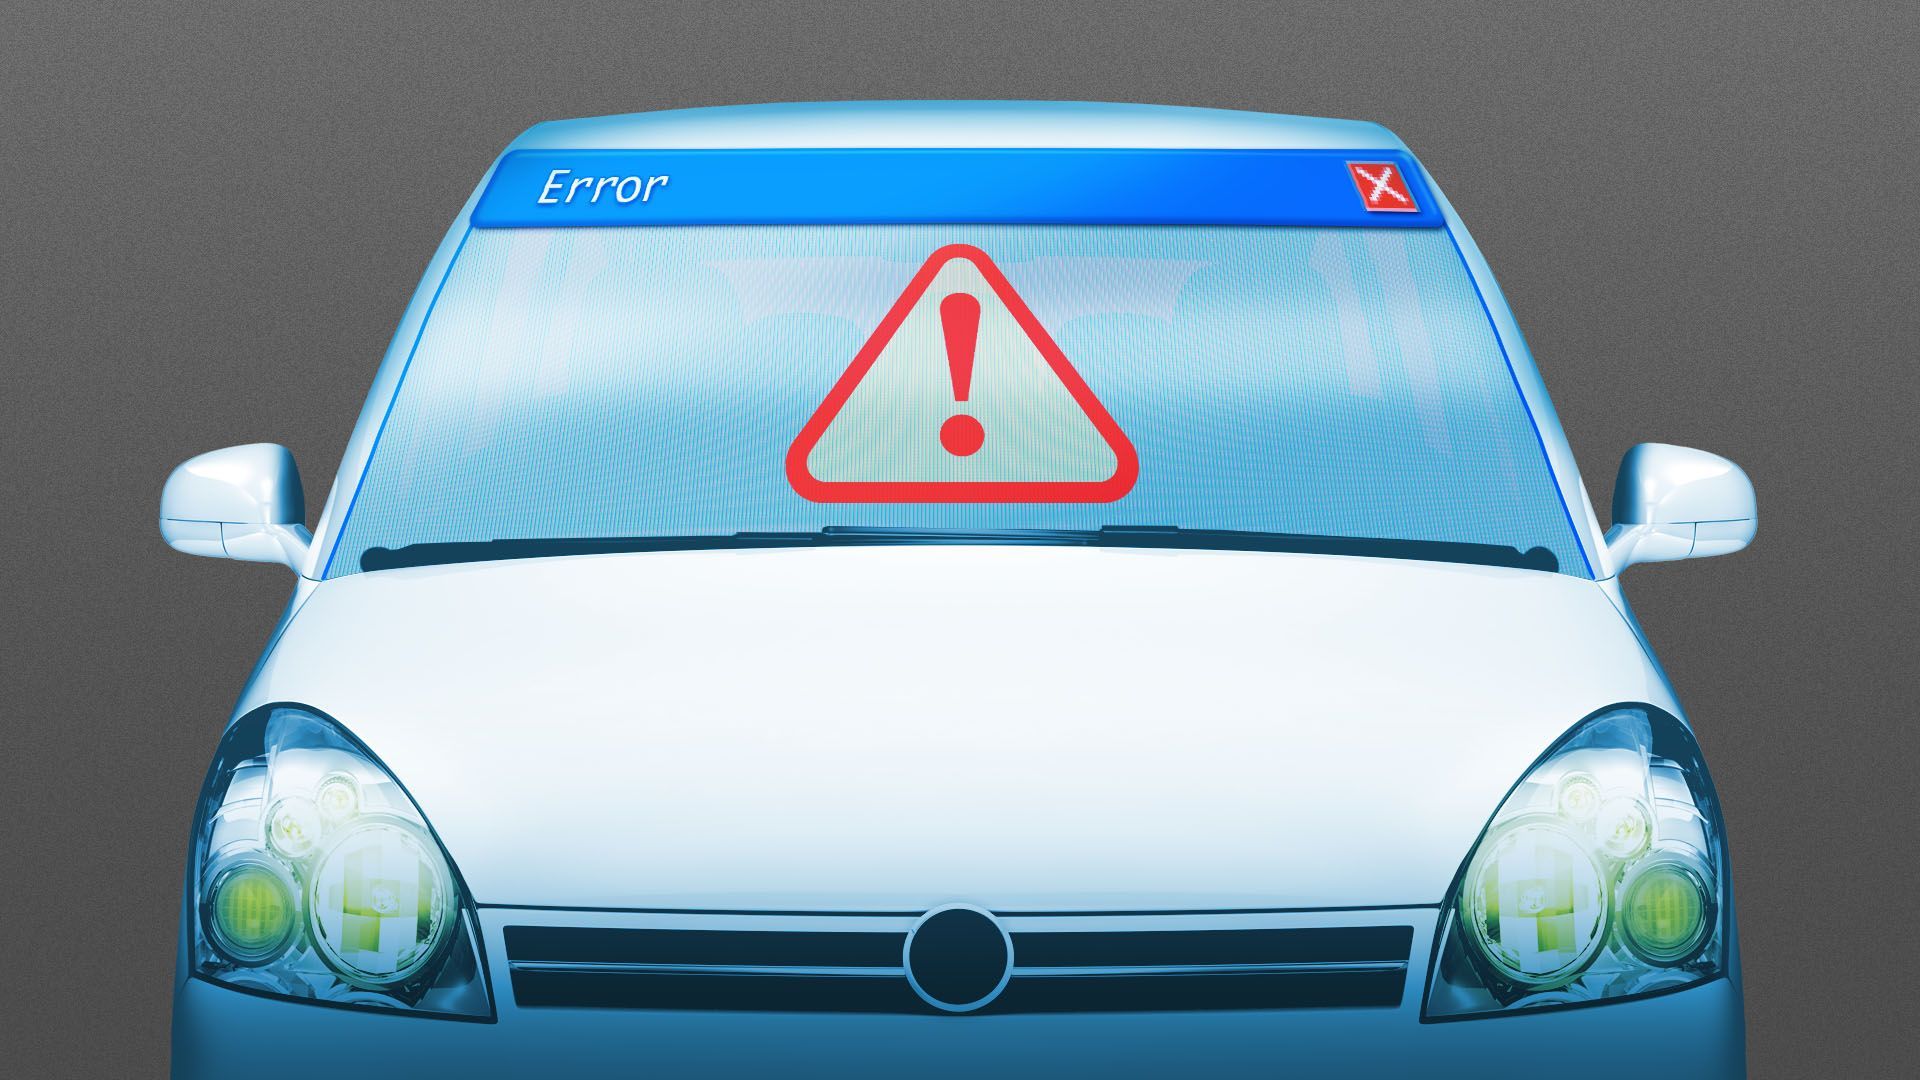 Illustration of a car with a front windscreen that looks like a browser window with an error message